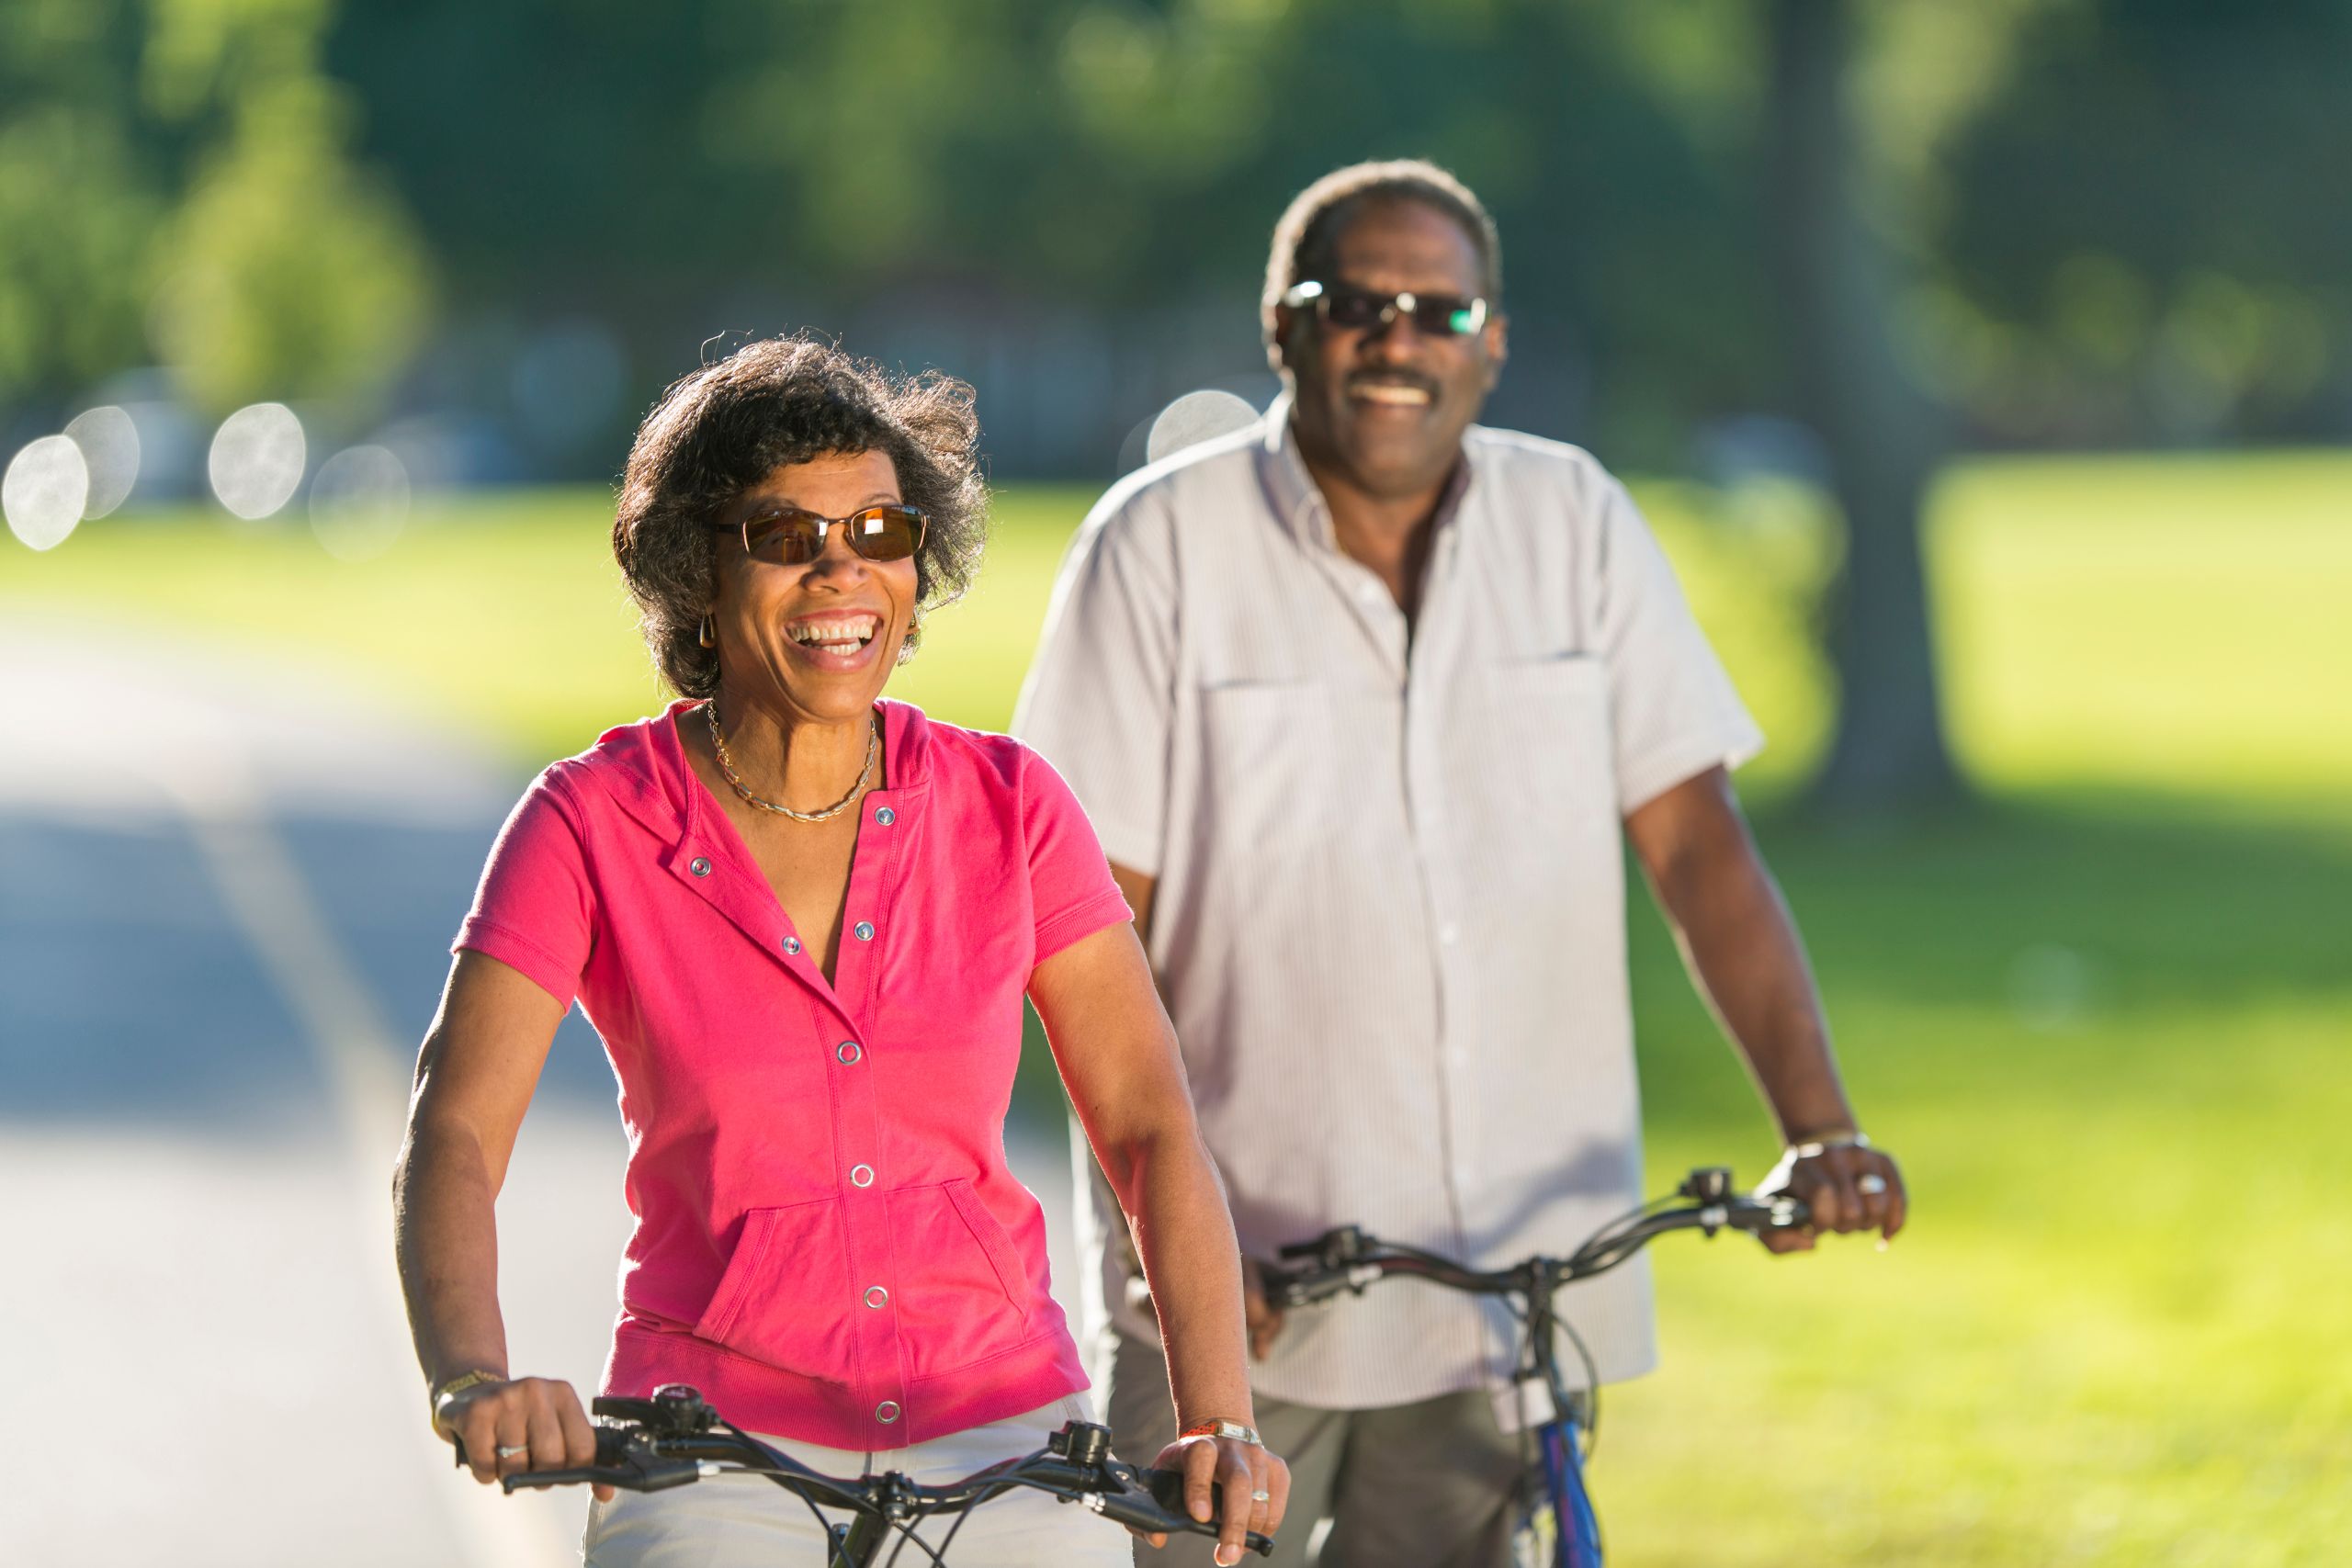 A happy man and woman riding bikes together outside